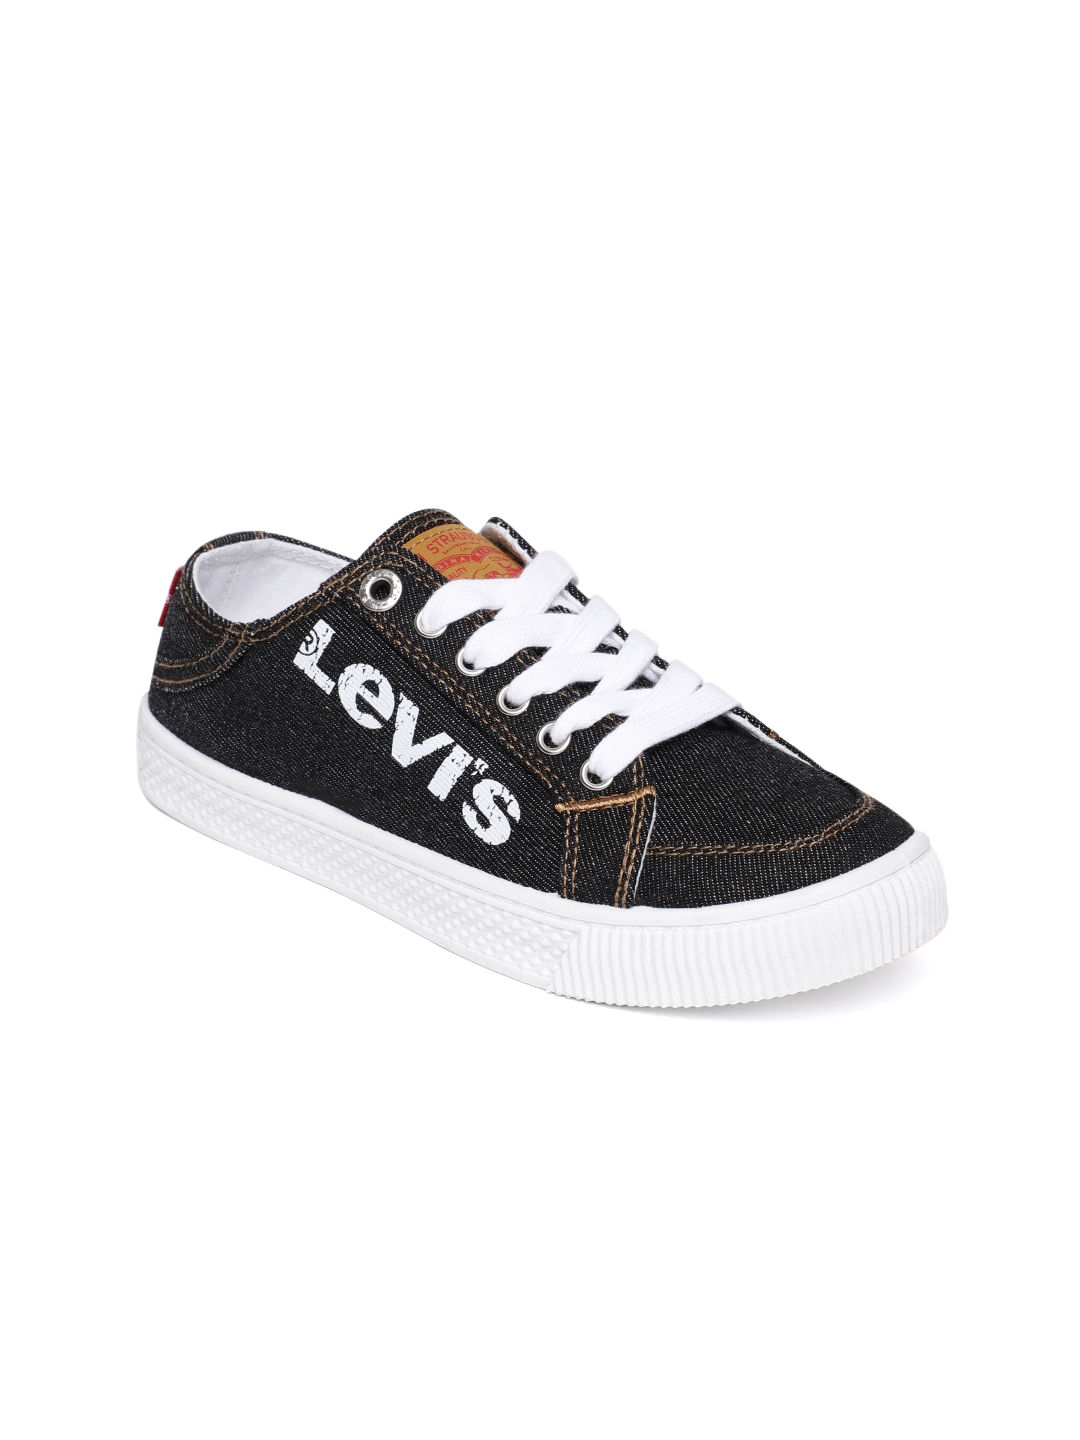 Levi's Womens Drive Hi Vegan Synthetic Leather Casual Hightop Sneaker Shoe-tuongthan.vn